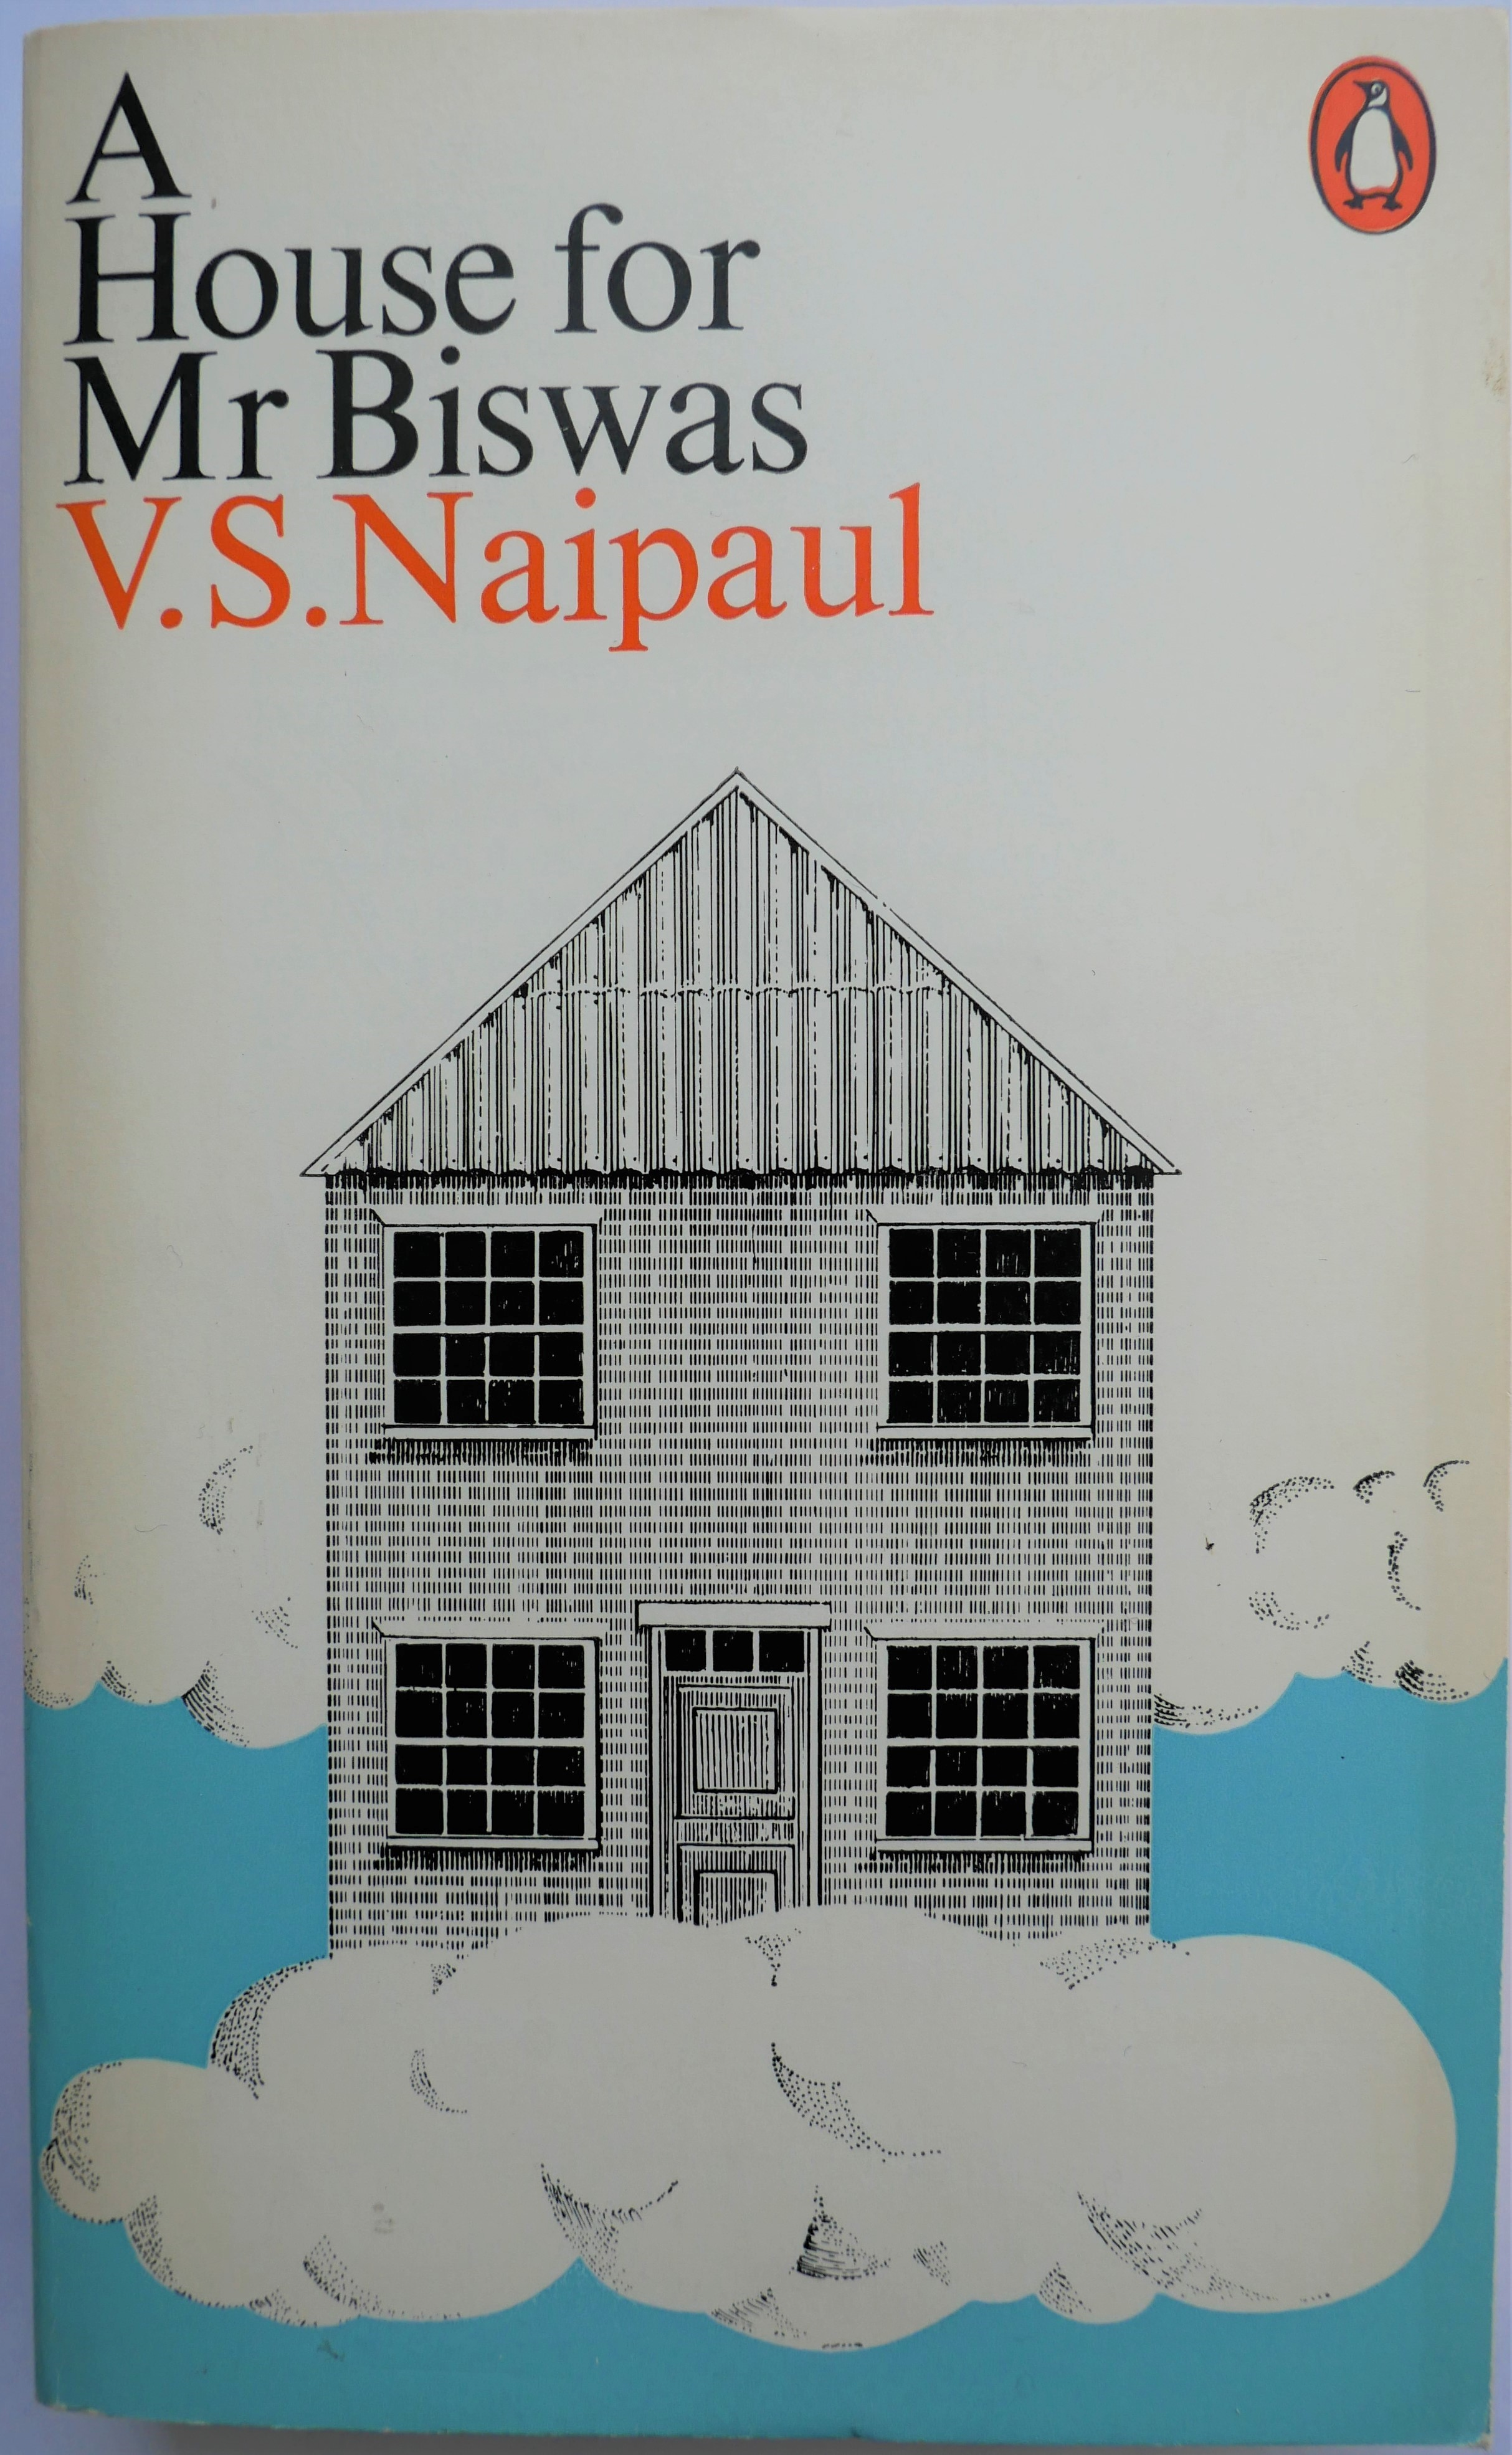 summary of a house for mr biswas by vs naipaul